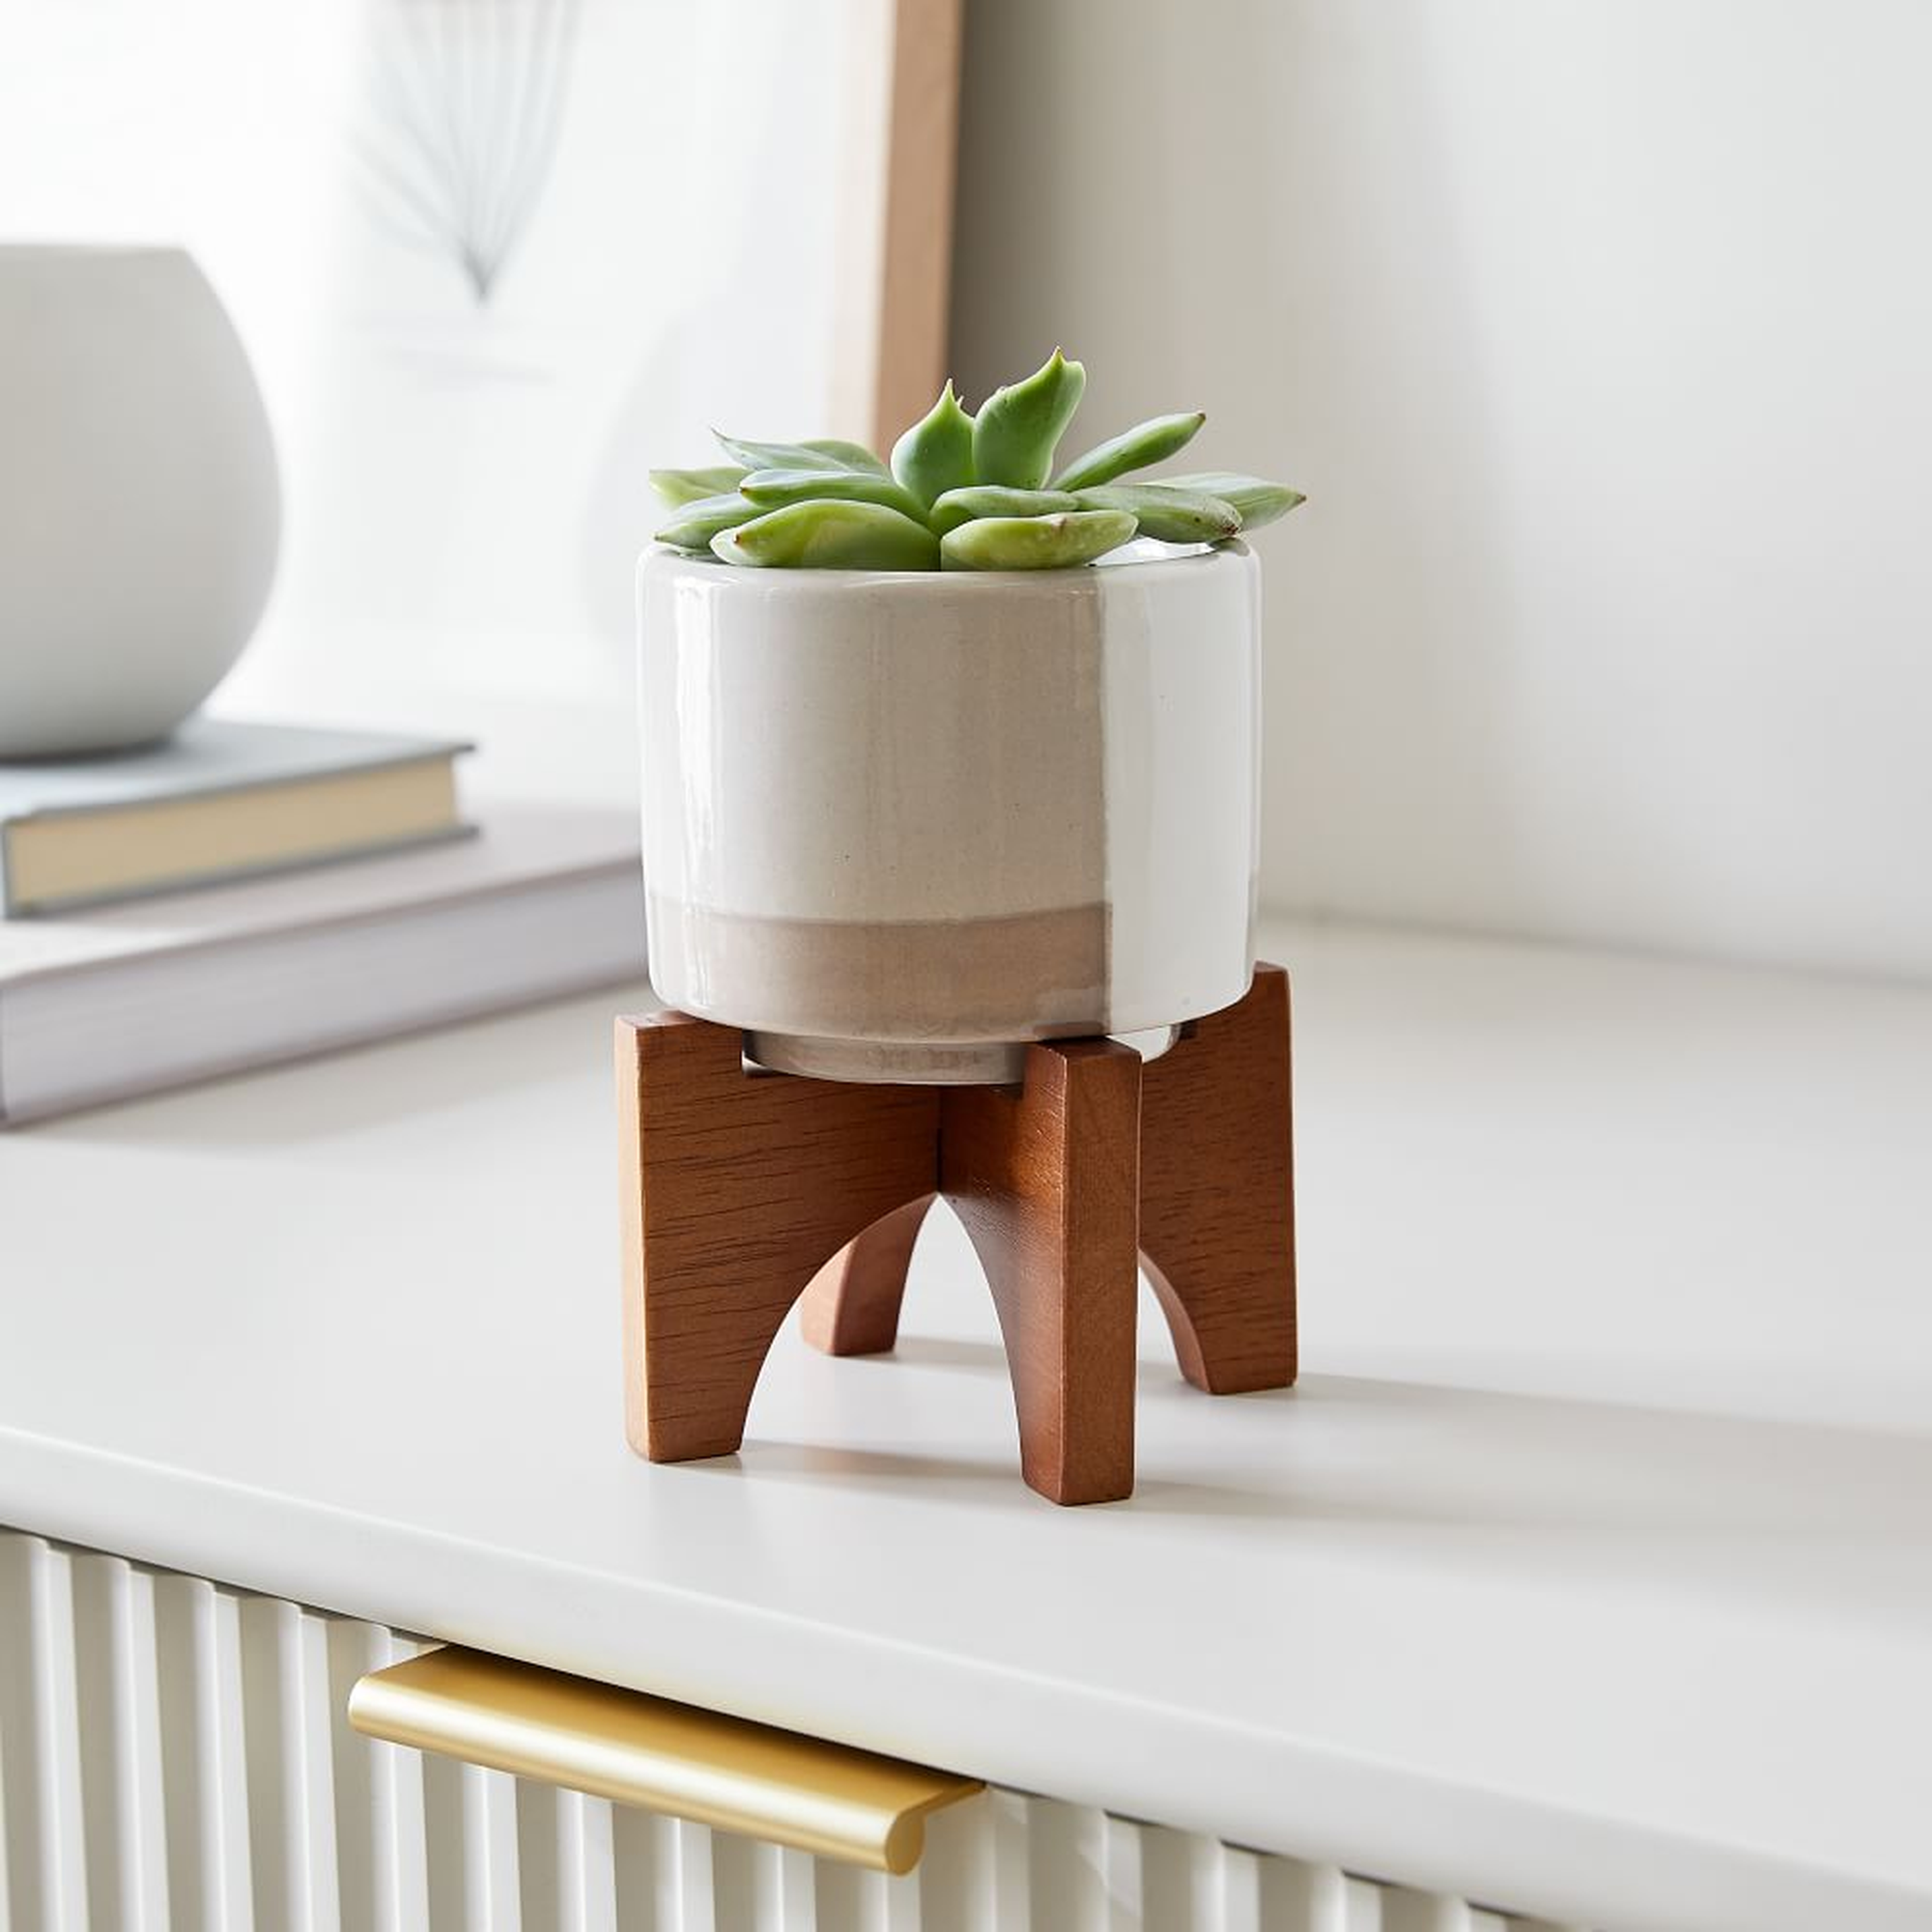 Turned Wood Tabletop Planter, Small, 3.75"D x 3"H, Mauve & White - West Elm